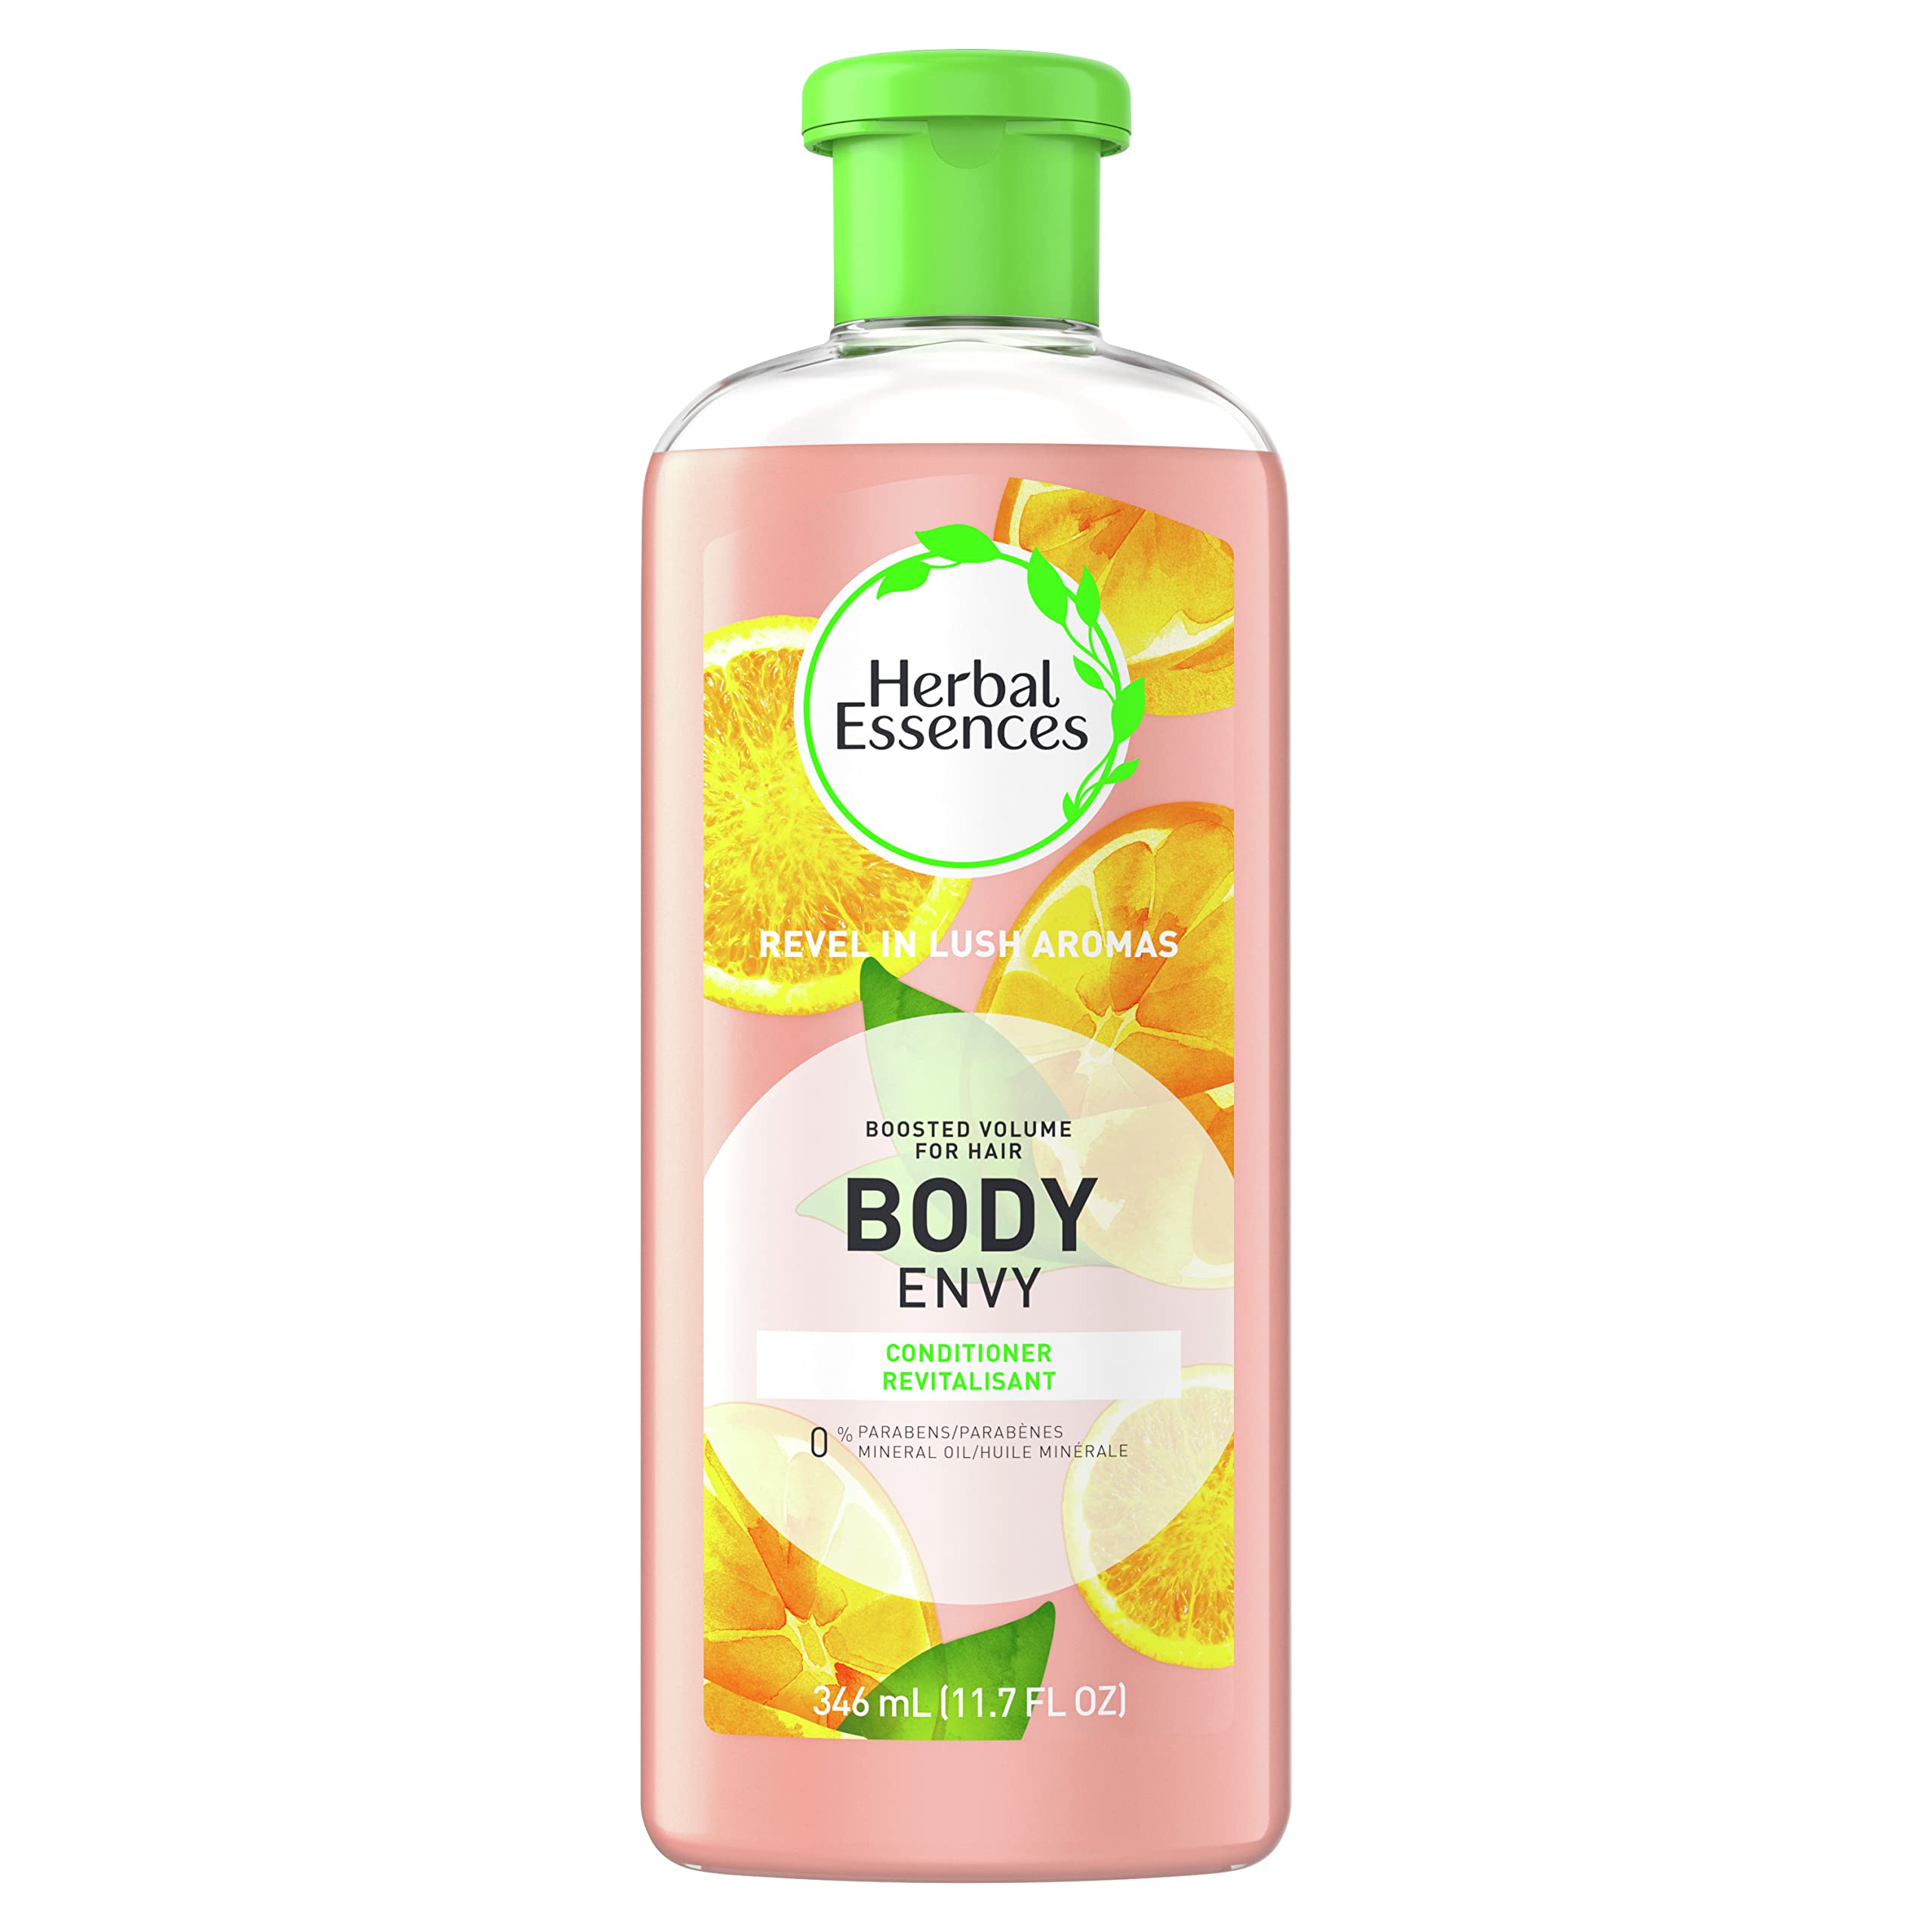 Herbal Essences Body Envy Conditioner Boosted Volume for Hair, 11.7 fl oz